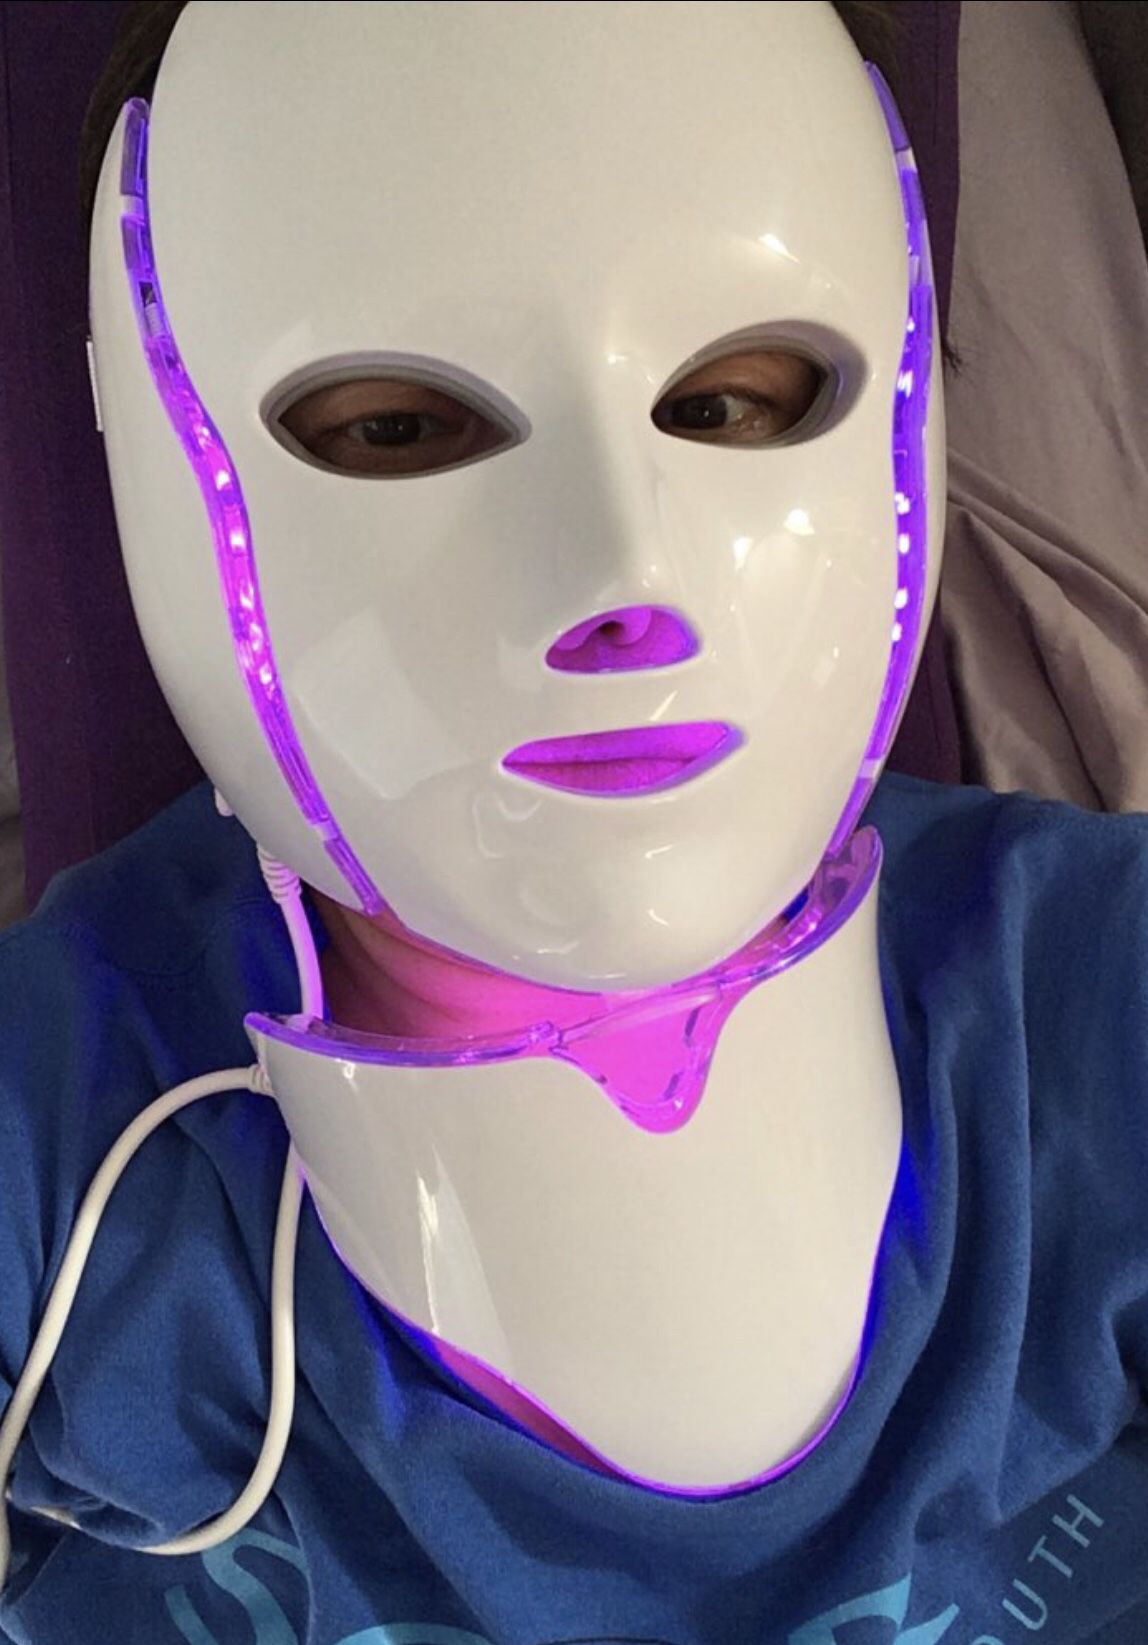 Led light therapy mask.